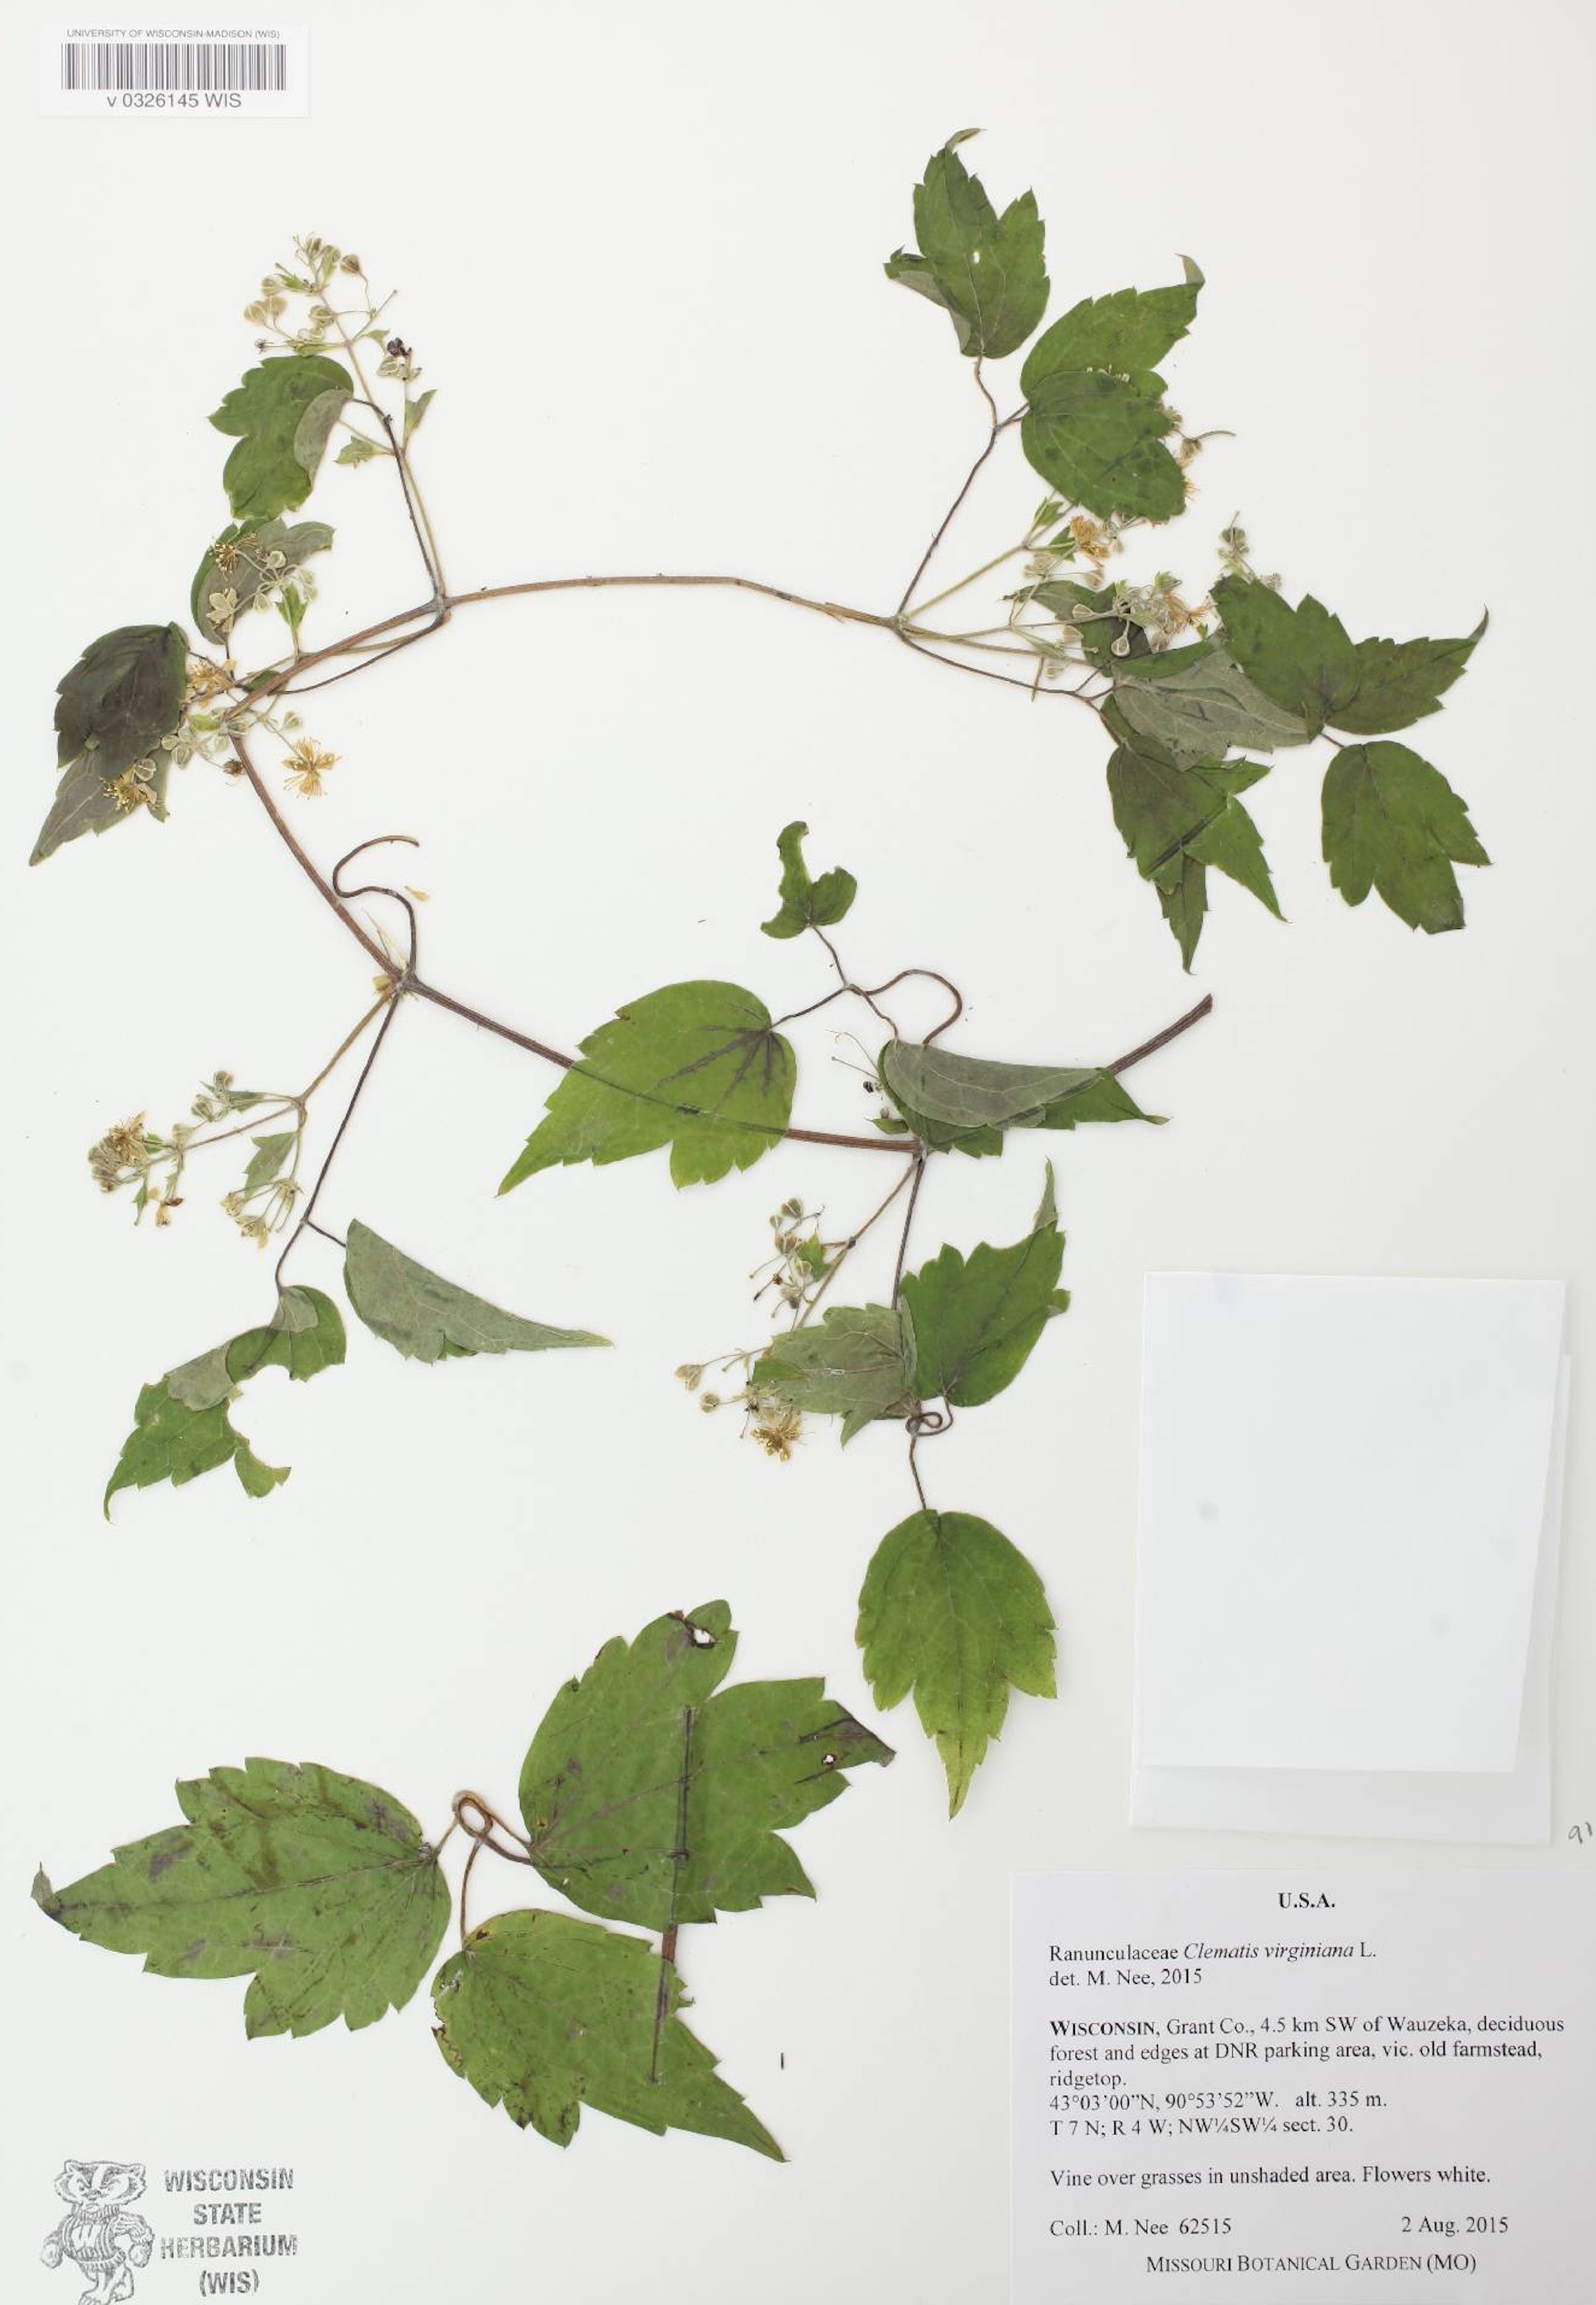 Virgin's Bower specimen collected in Grant County on August 2, 2015.